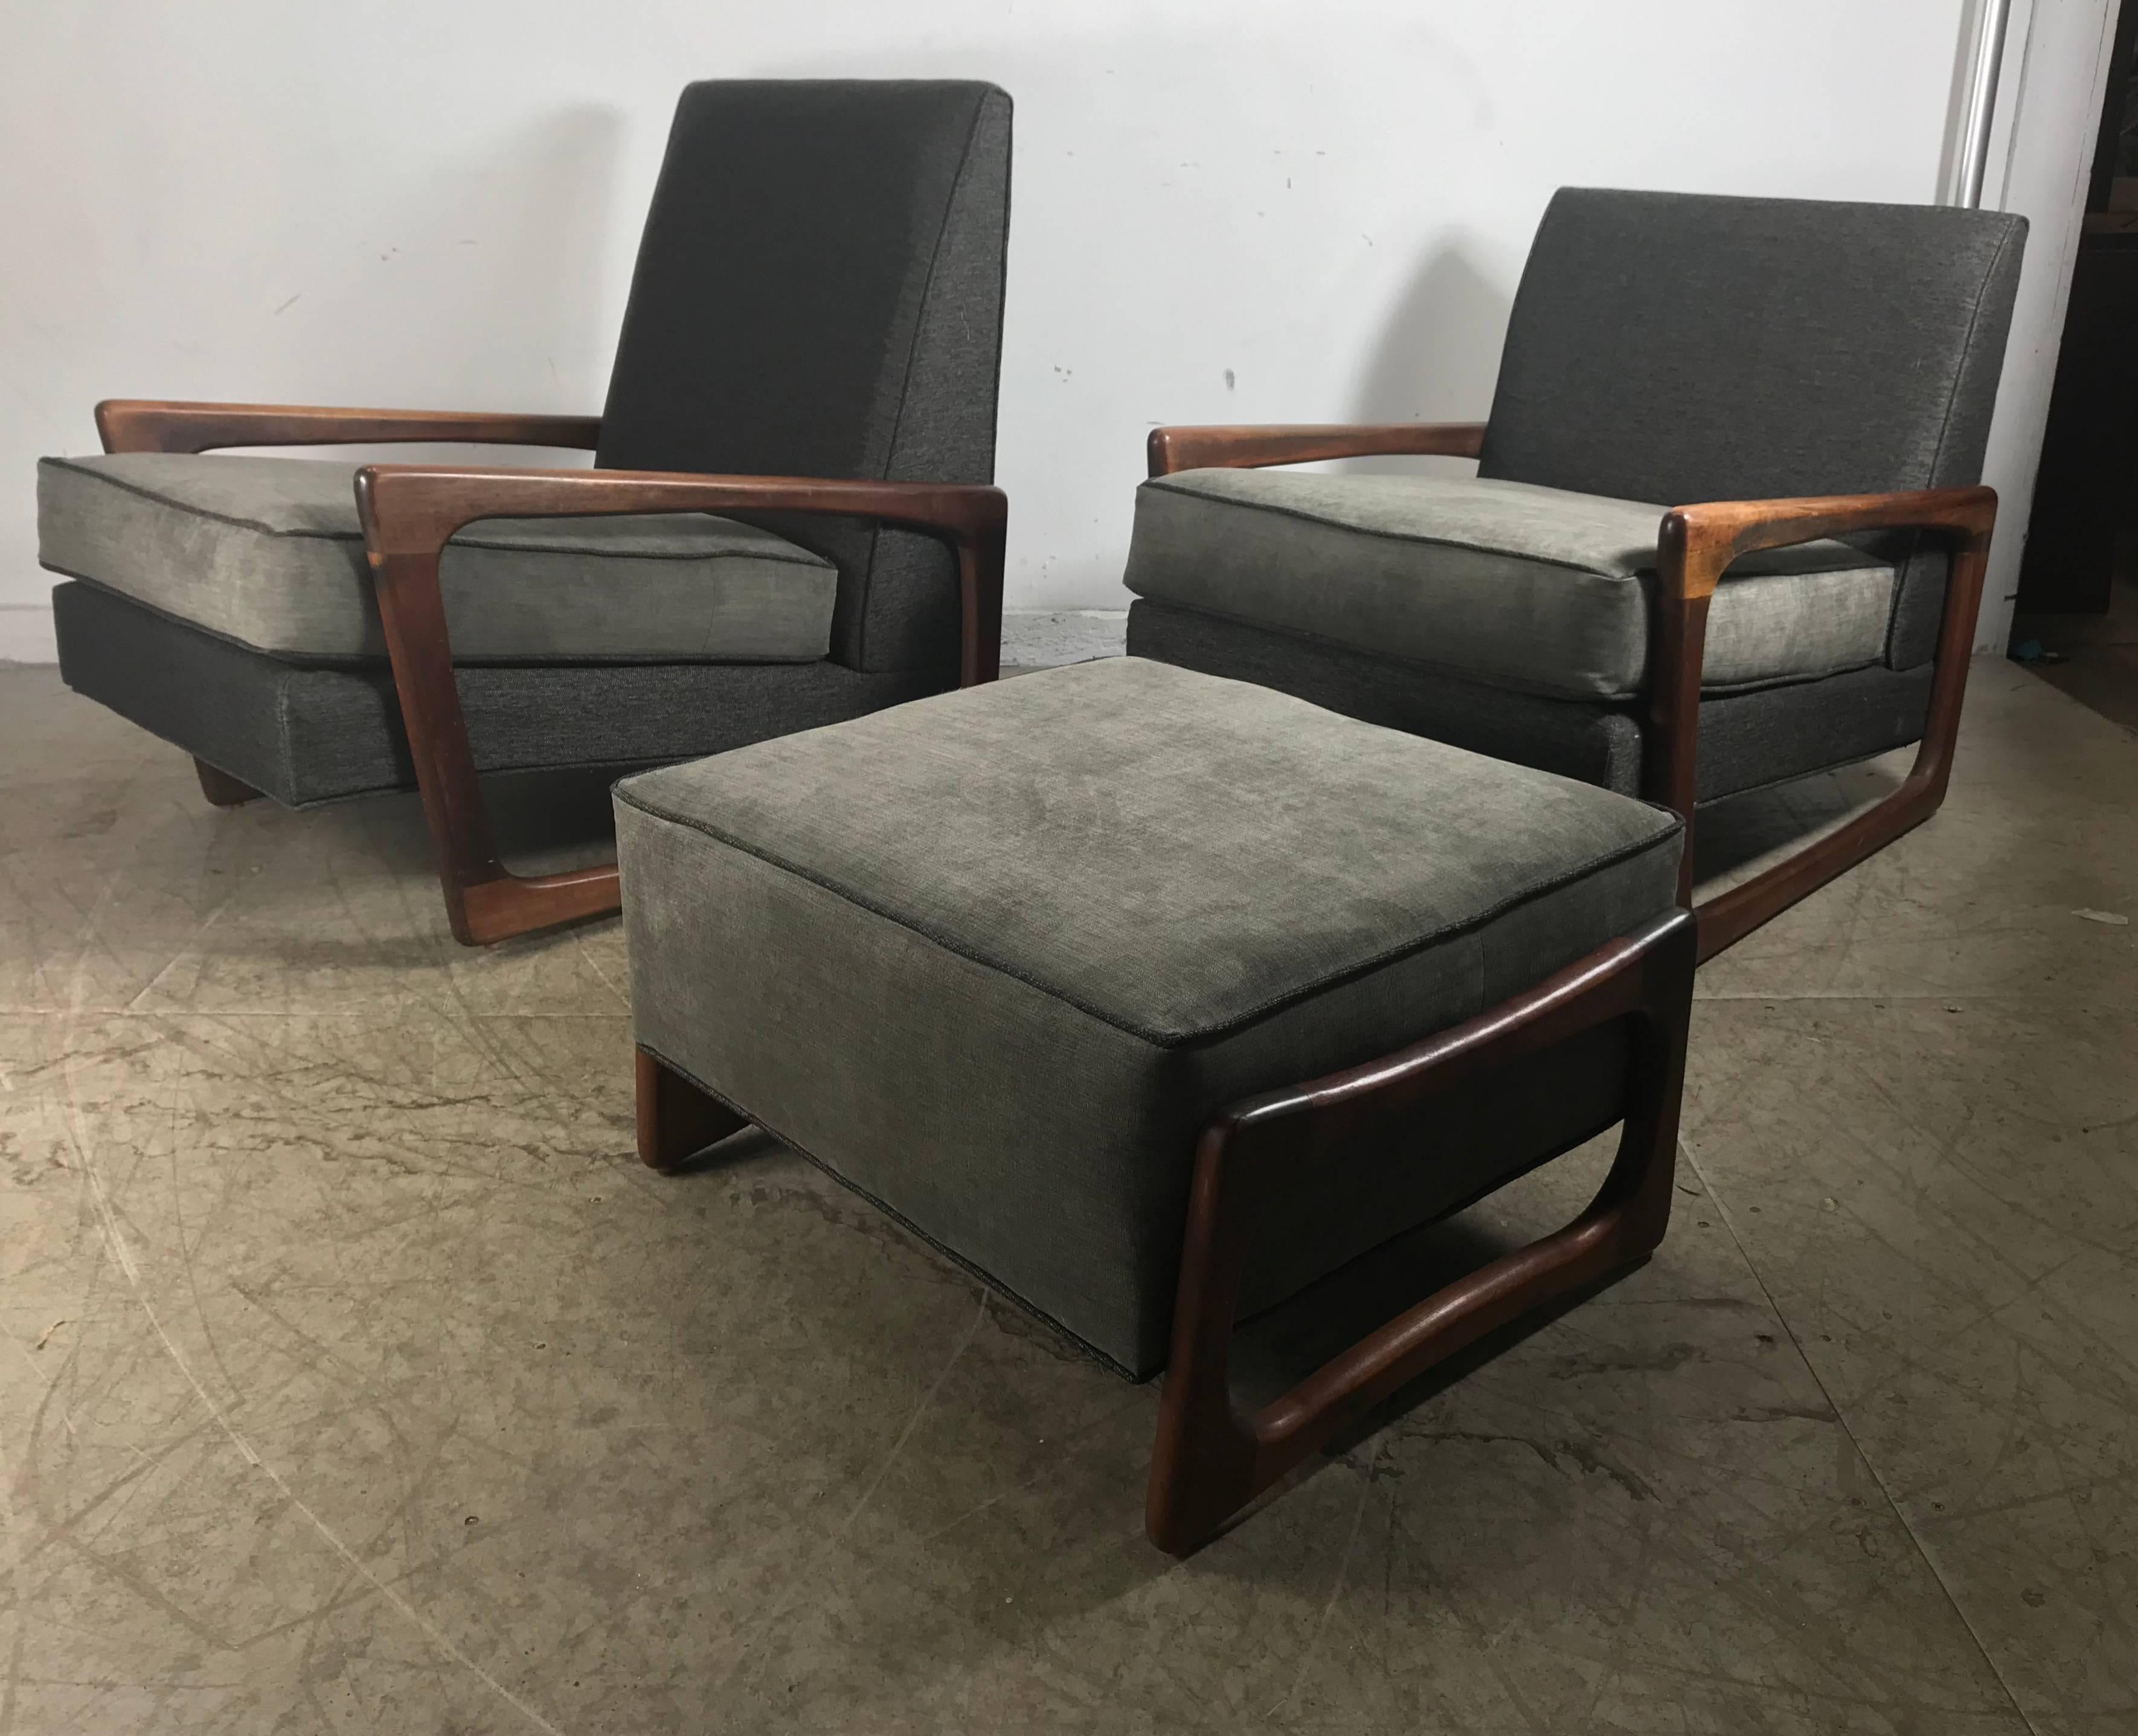 20th Century Stunning Classic Modernist Sculptural Lounge Chairs and Ottoman Adrian Pearsall